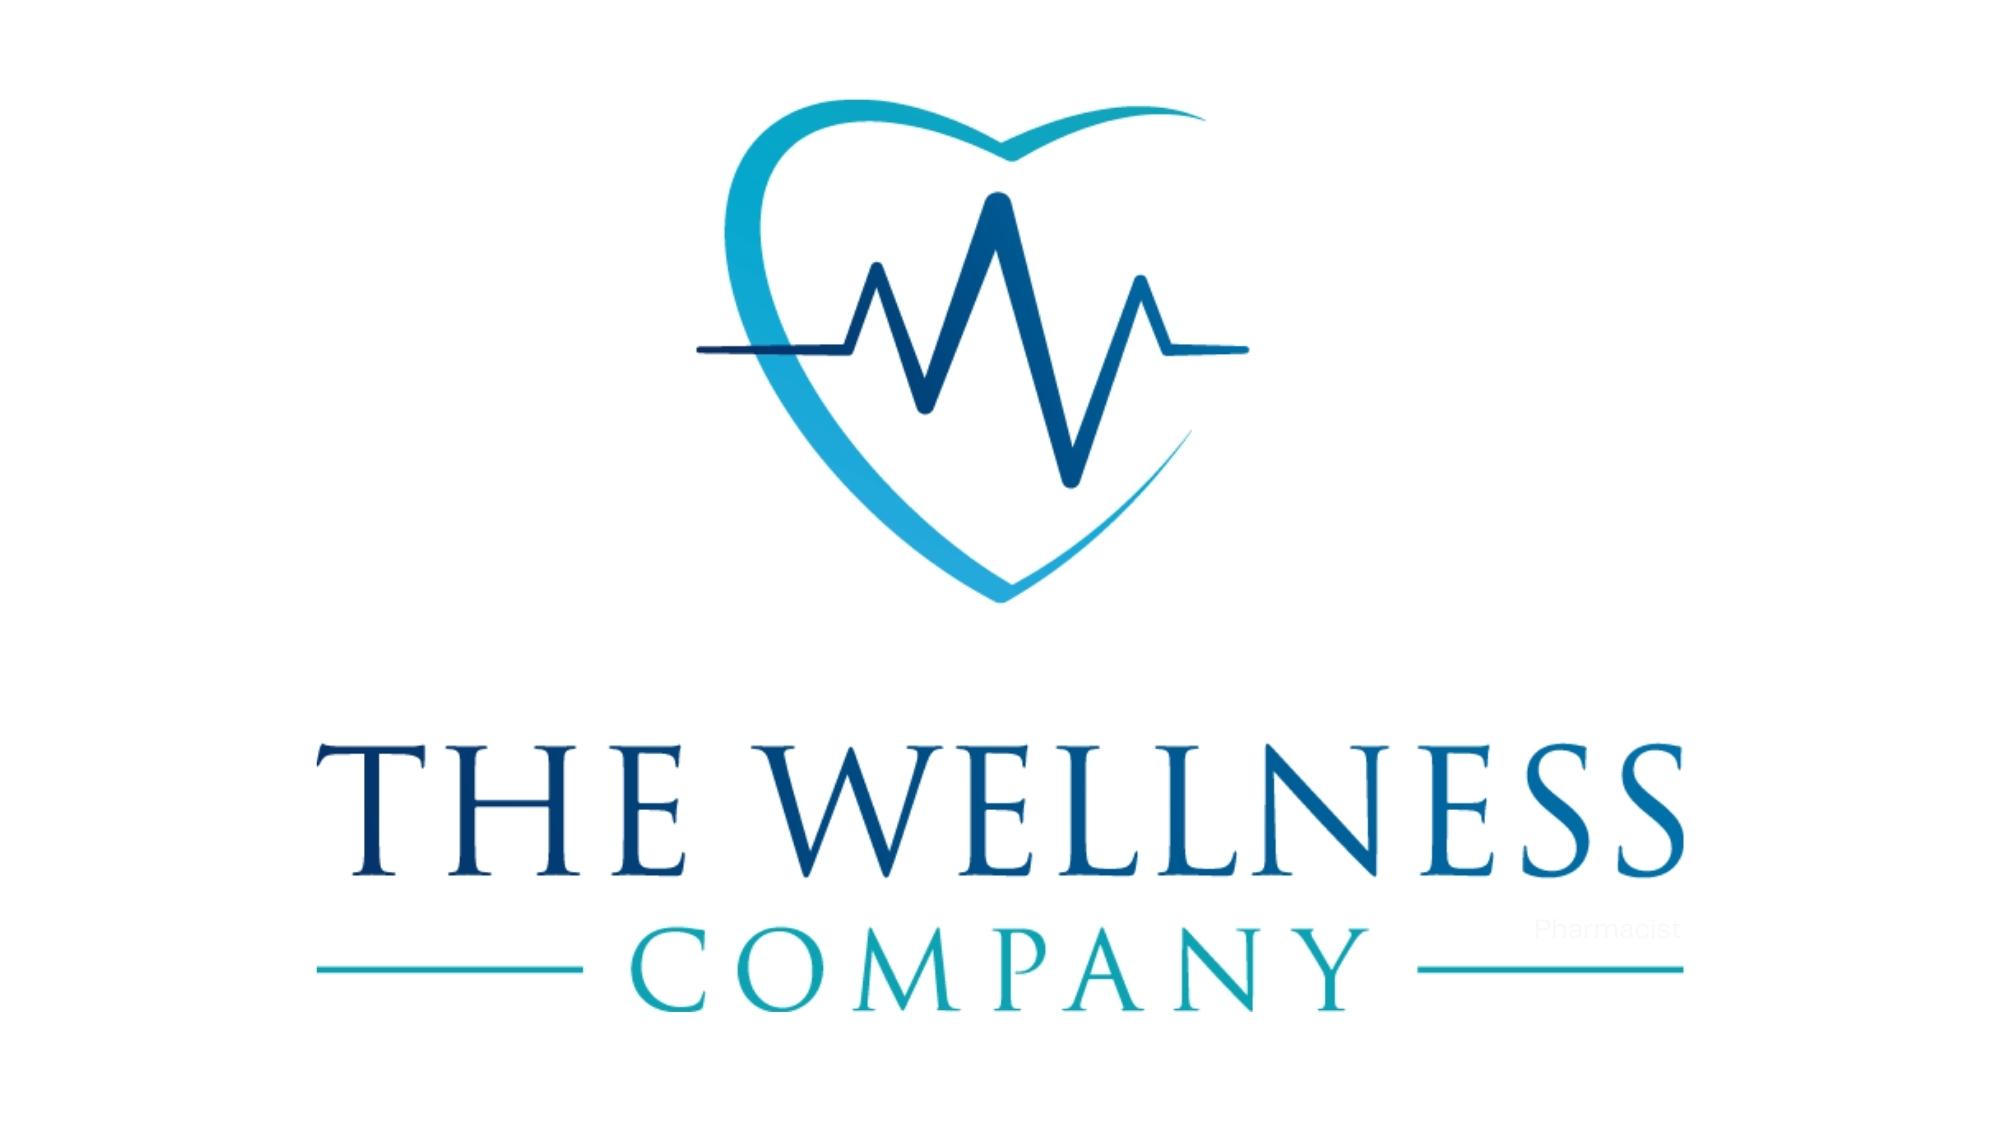 The Wellness Company Launches New Integrated Model to Increase Access to Quality Health Care